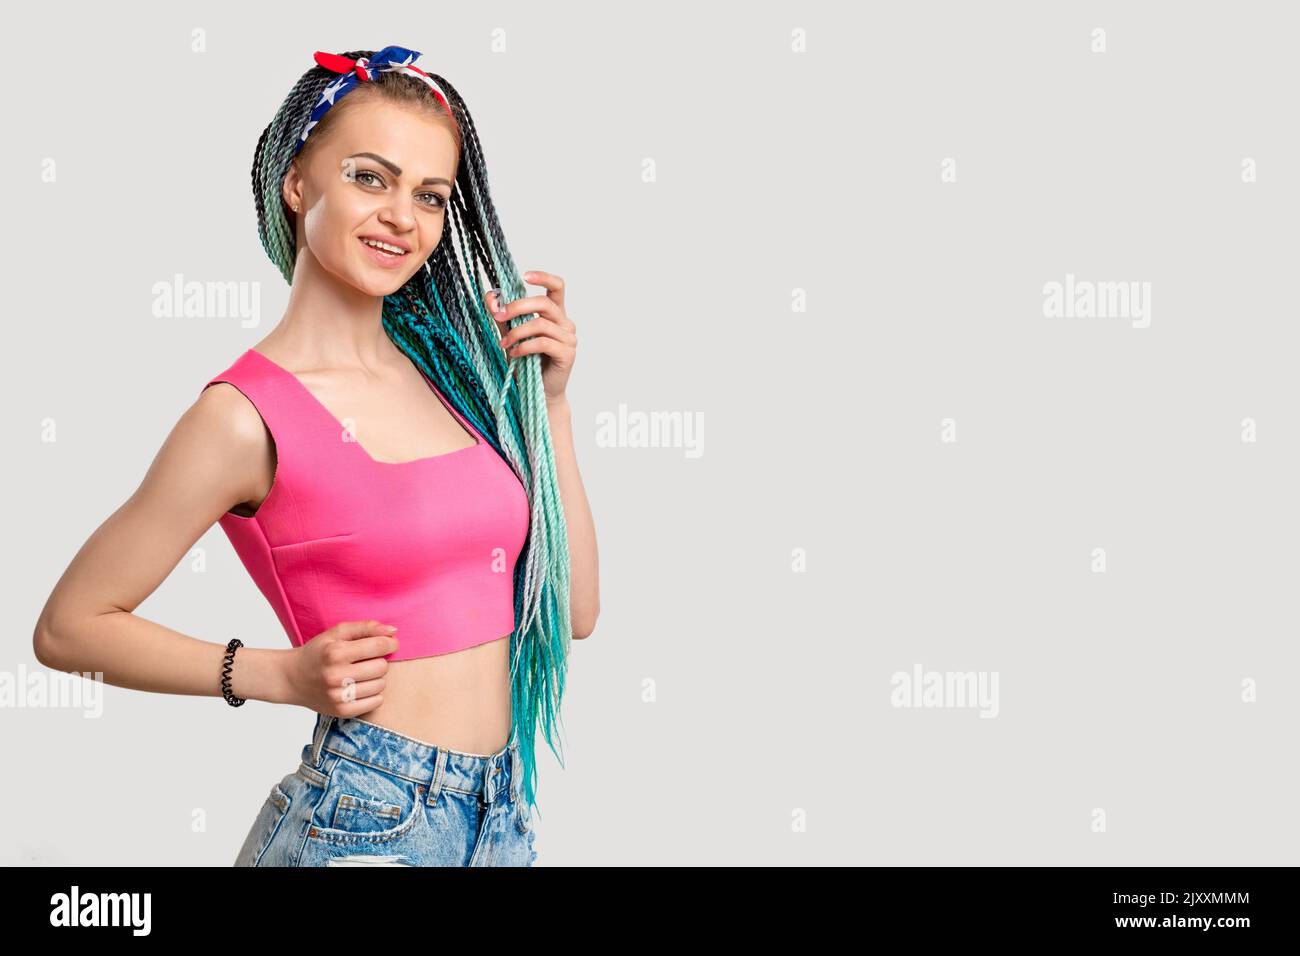 woman blue colored hair braids bright dyed dreads Stock Photo